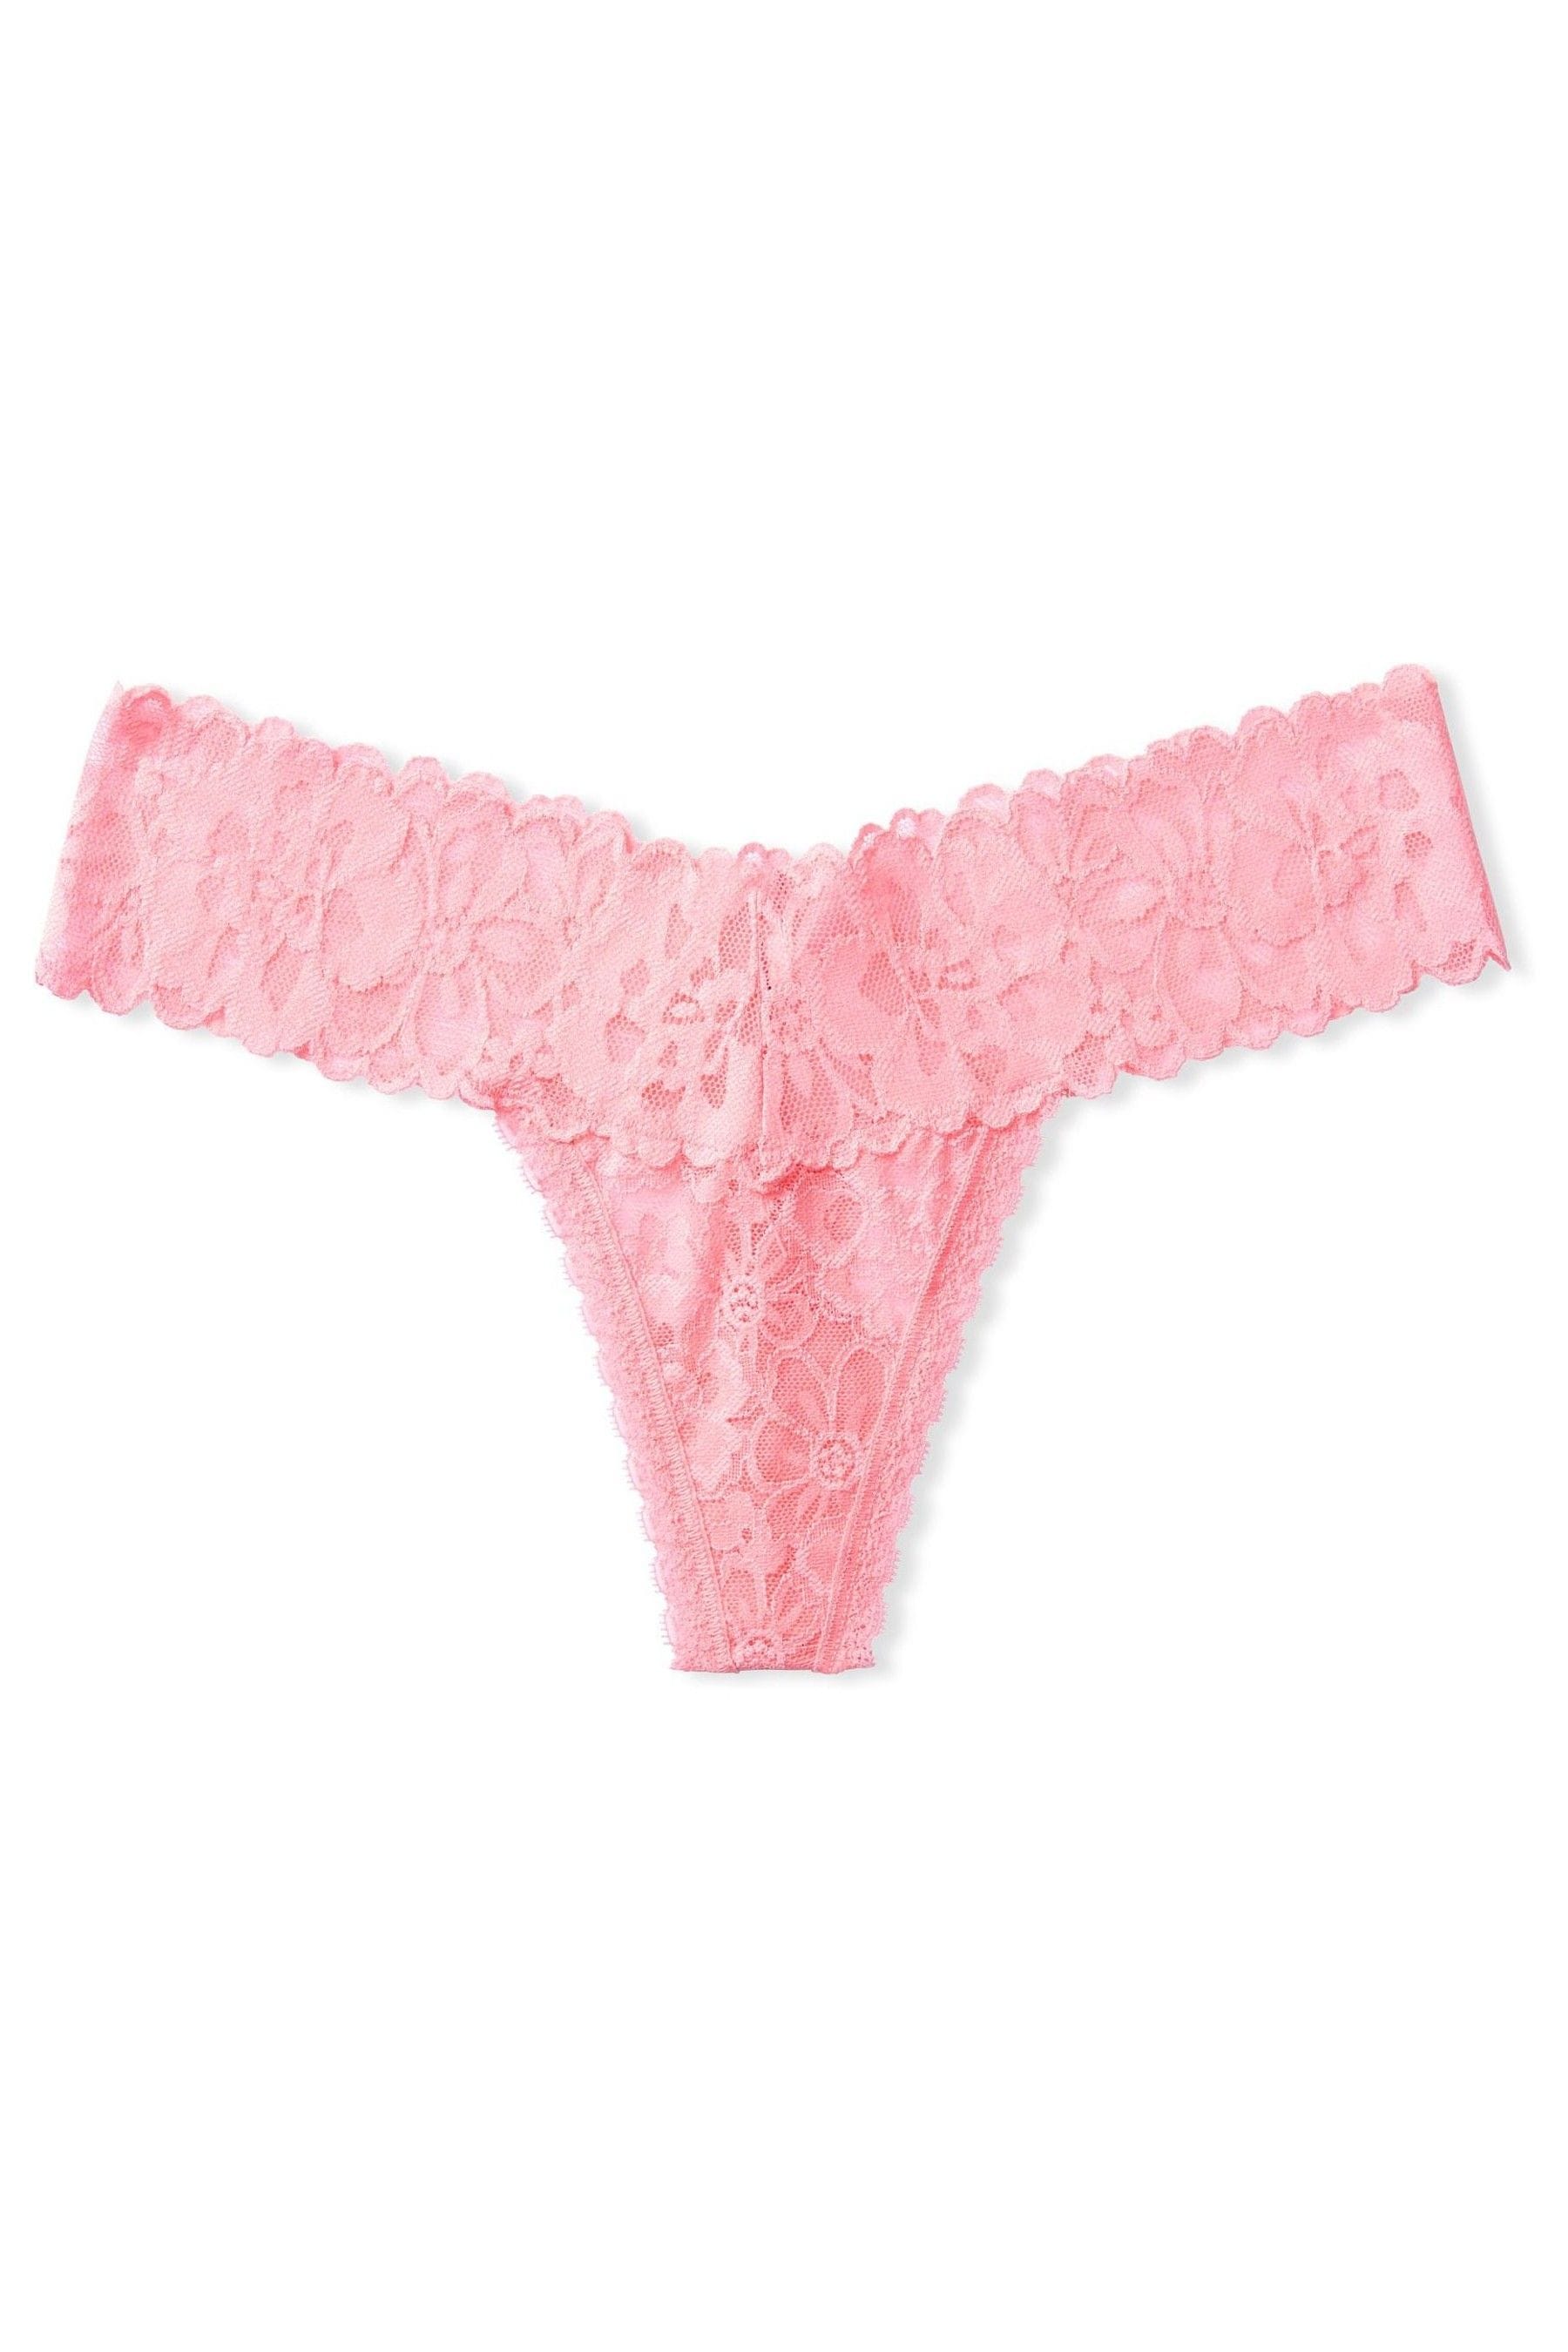 Buy Victoria's Secret Lace-Up Thong Panty from the Victoria's Secret UK ...